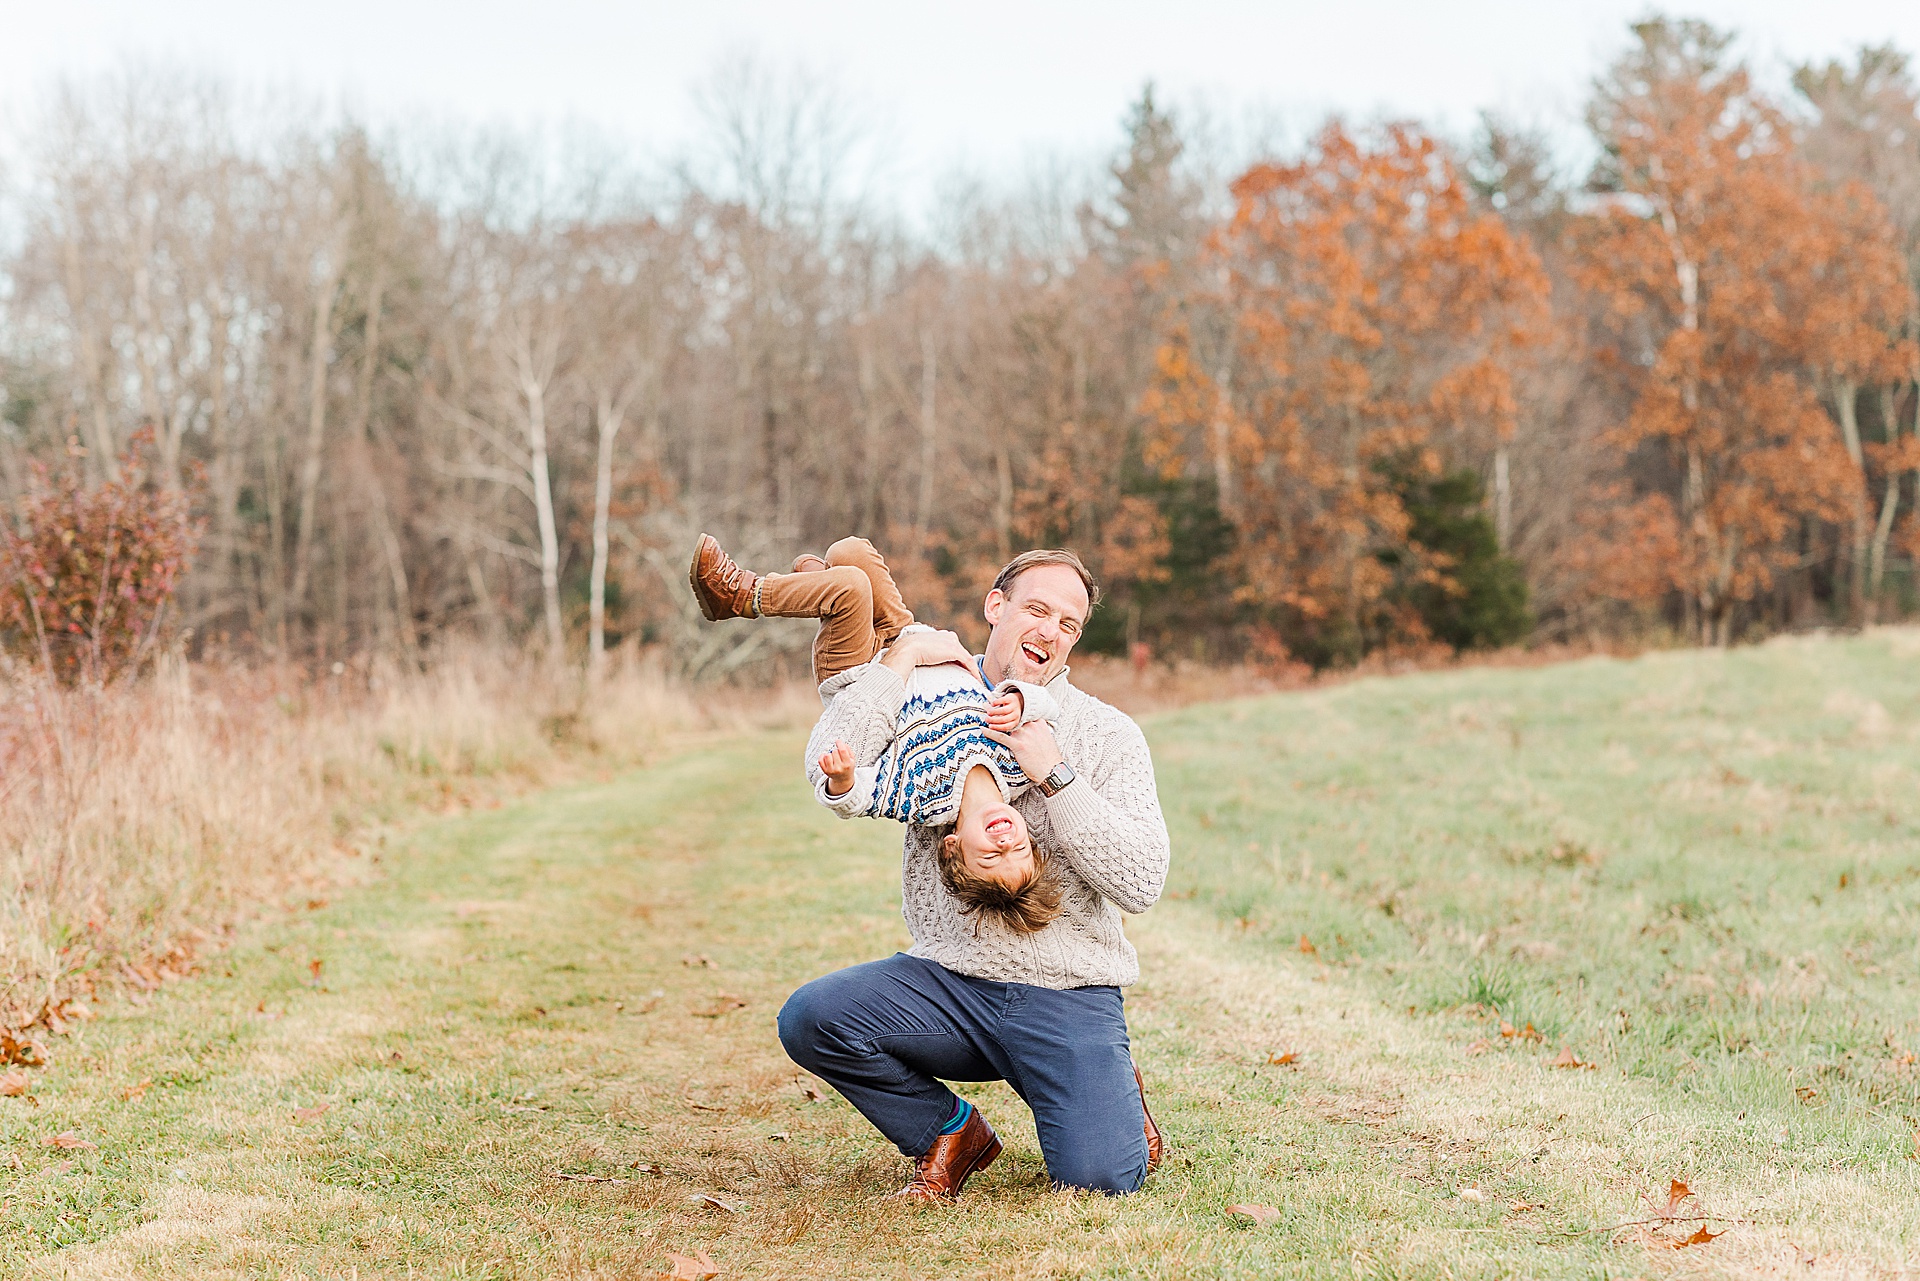 dad holds son upside down during family photo session with Sara Sniderman Photography at Breakneck HIll Reservation, Southboro Massachusetts